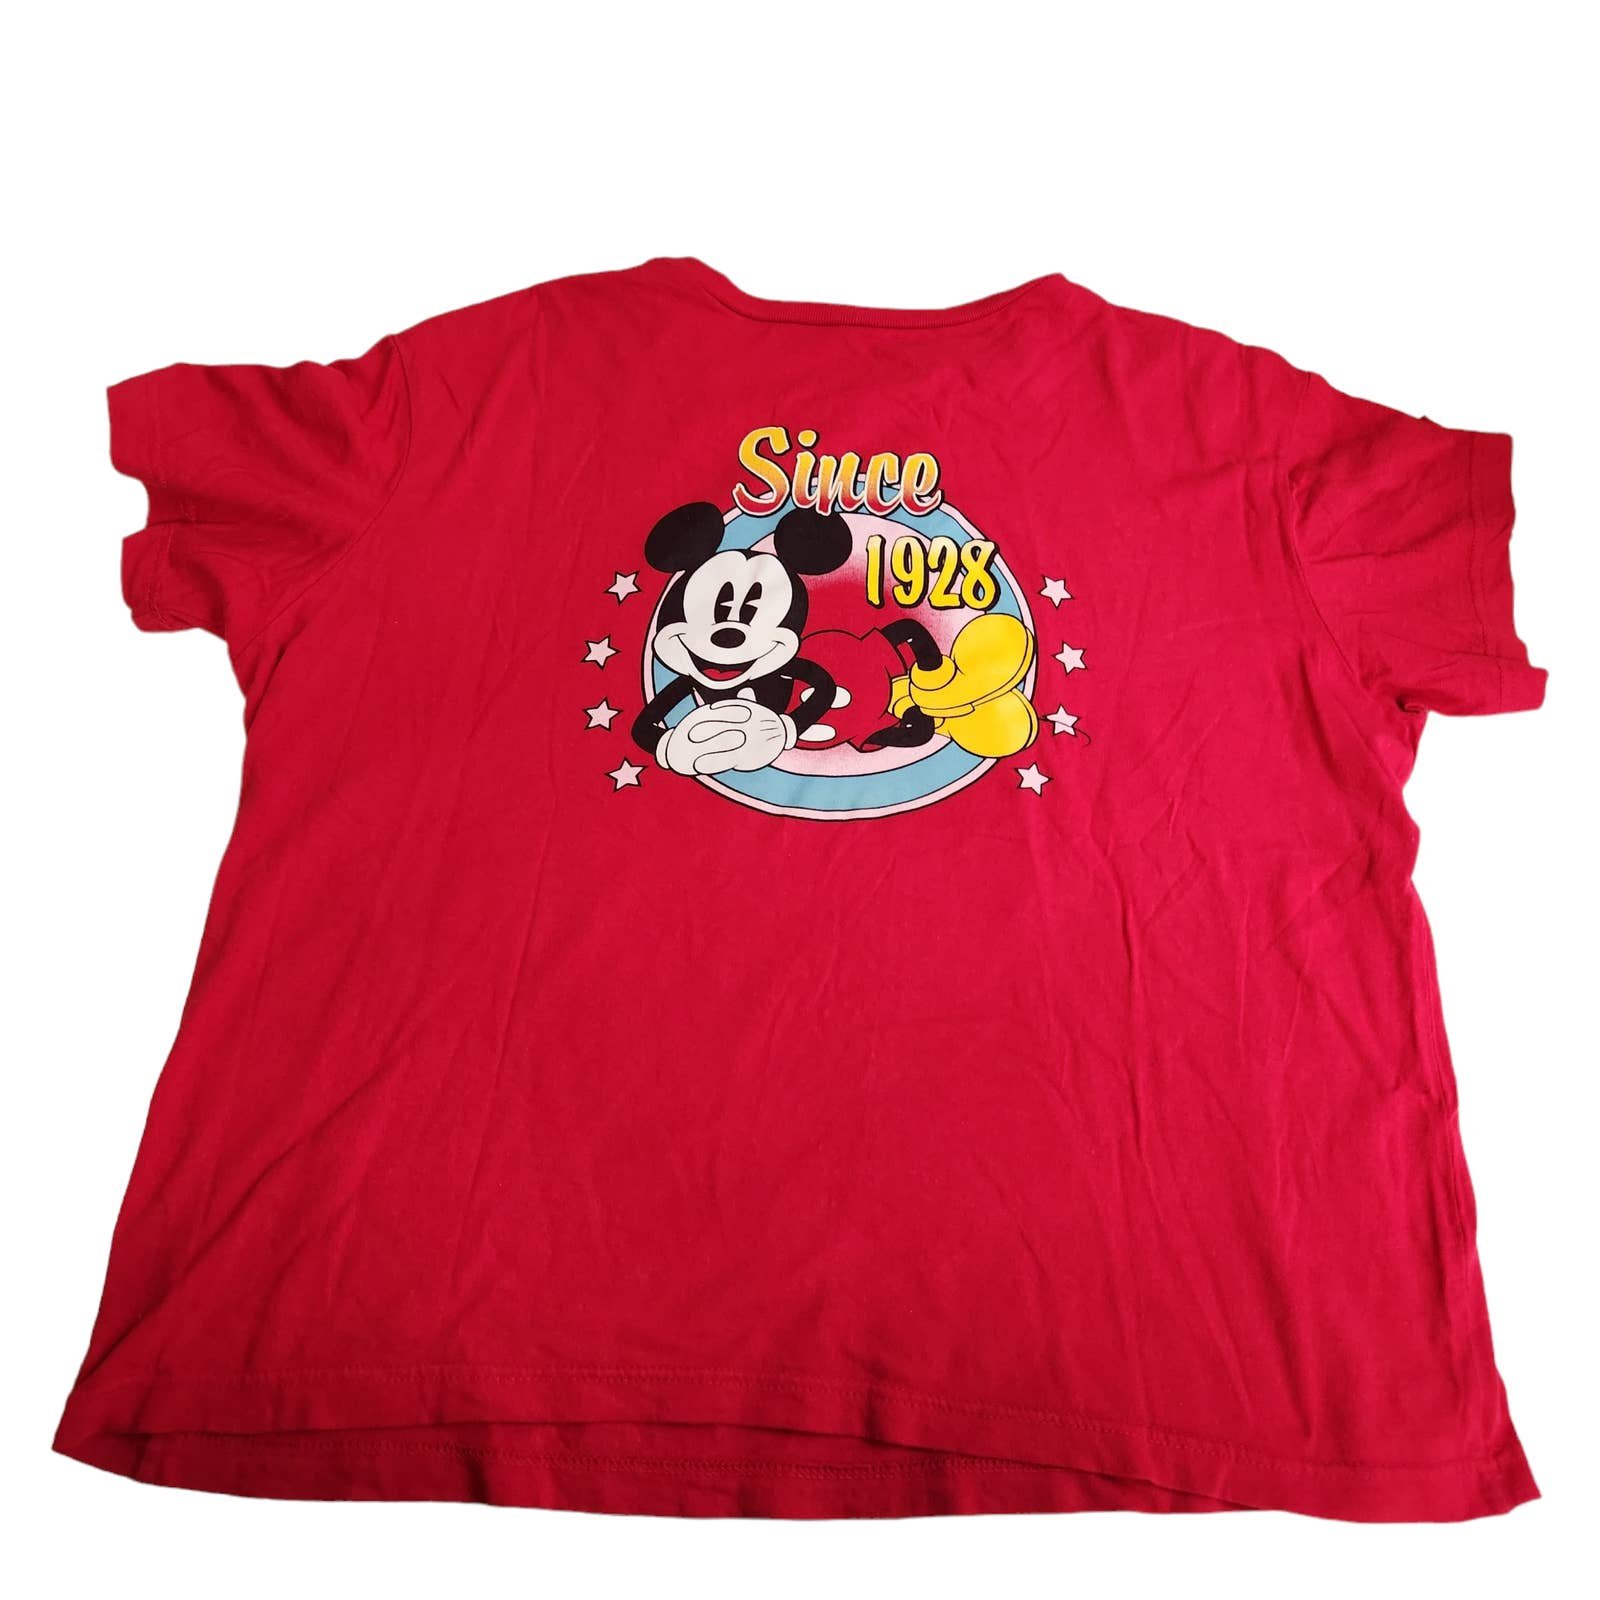 High quality Disney 2X Mickey Mouse Short Sleeve Red T 